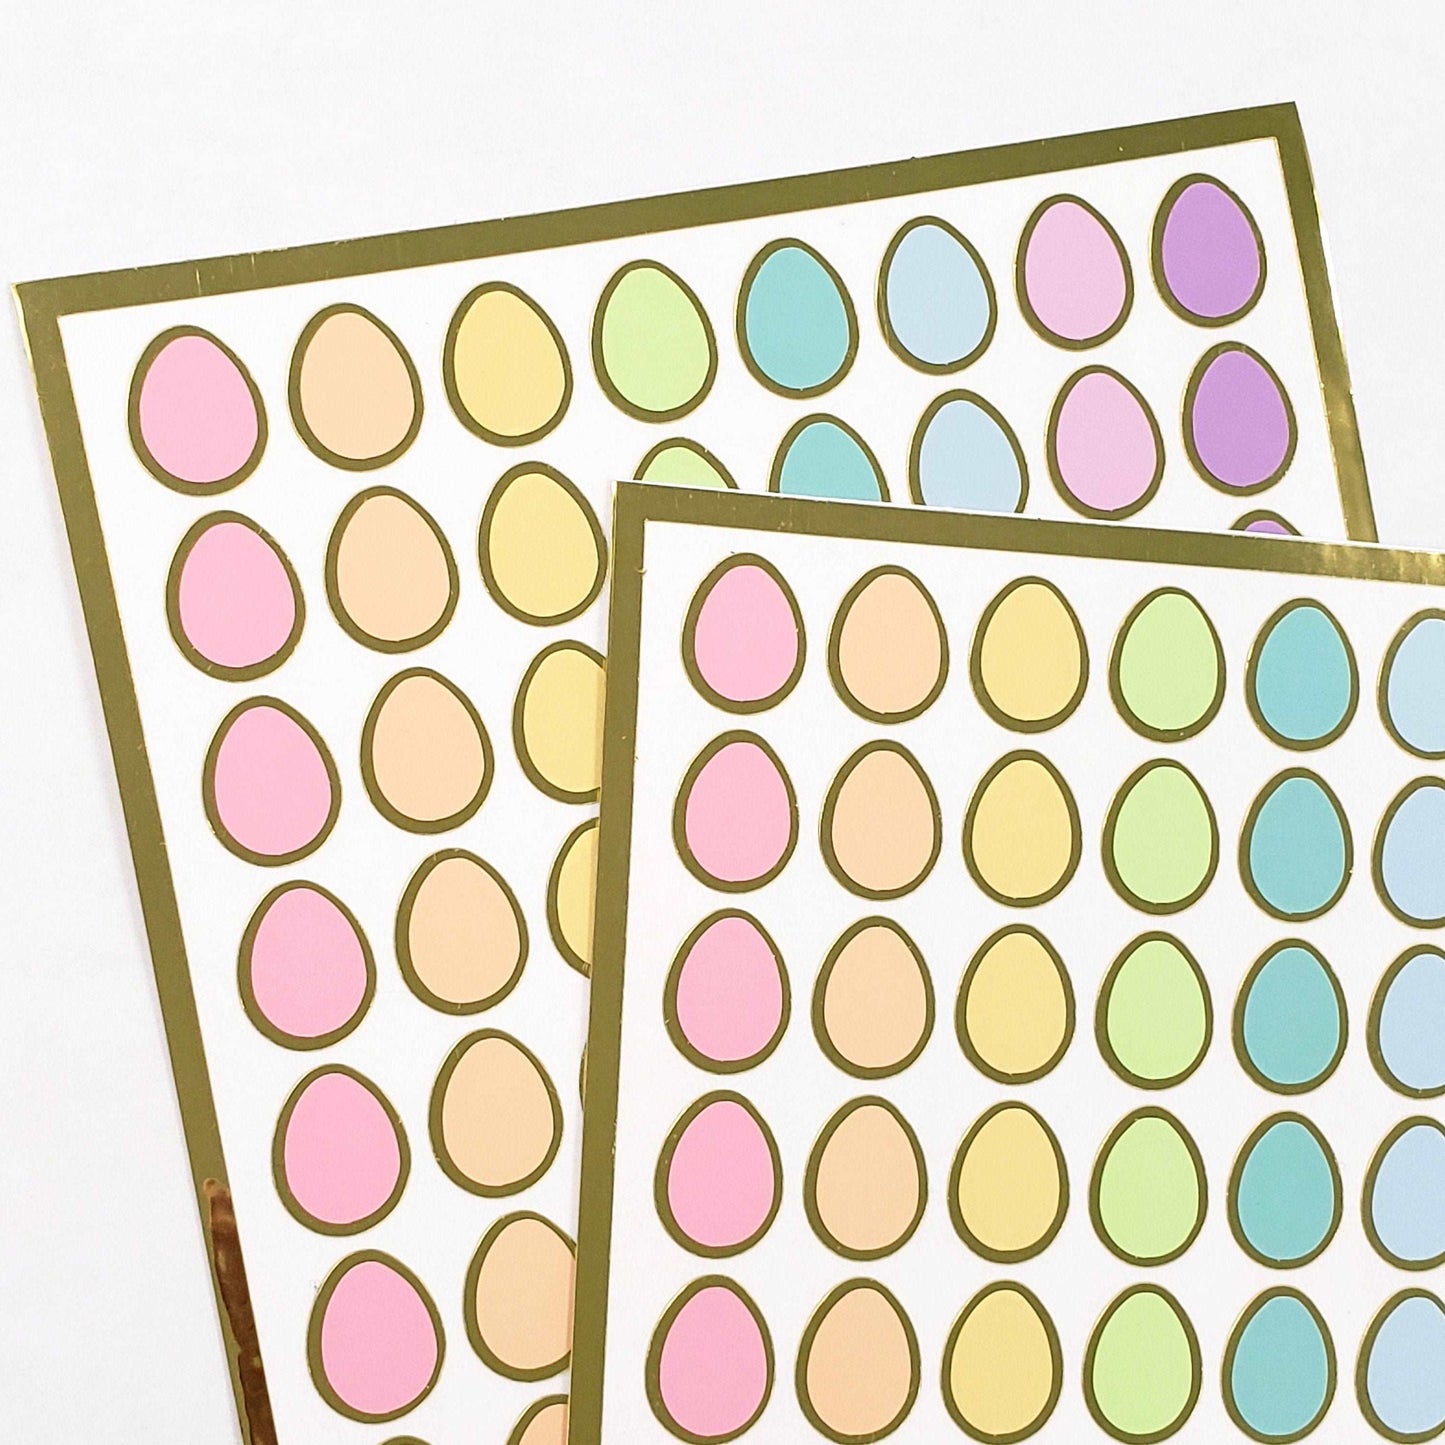 Pastel Easter Egg Stickers, set of 80 small egg decals for invitations, envelopes and journals, scrapbook page embellishments, sticker gift.